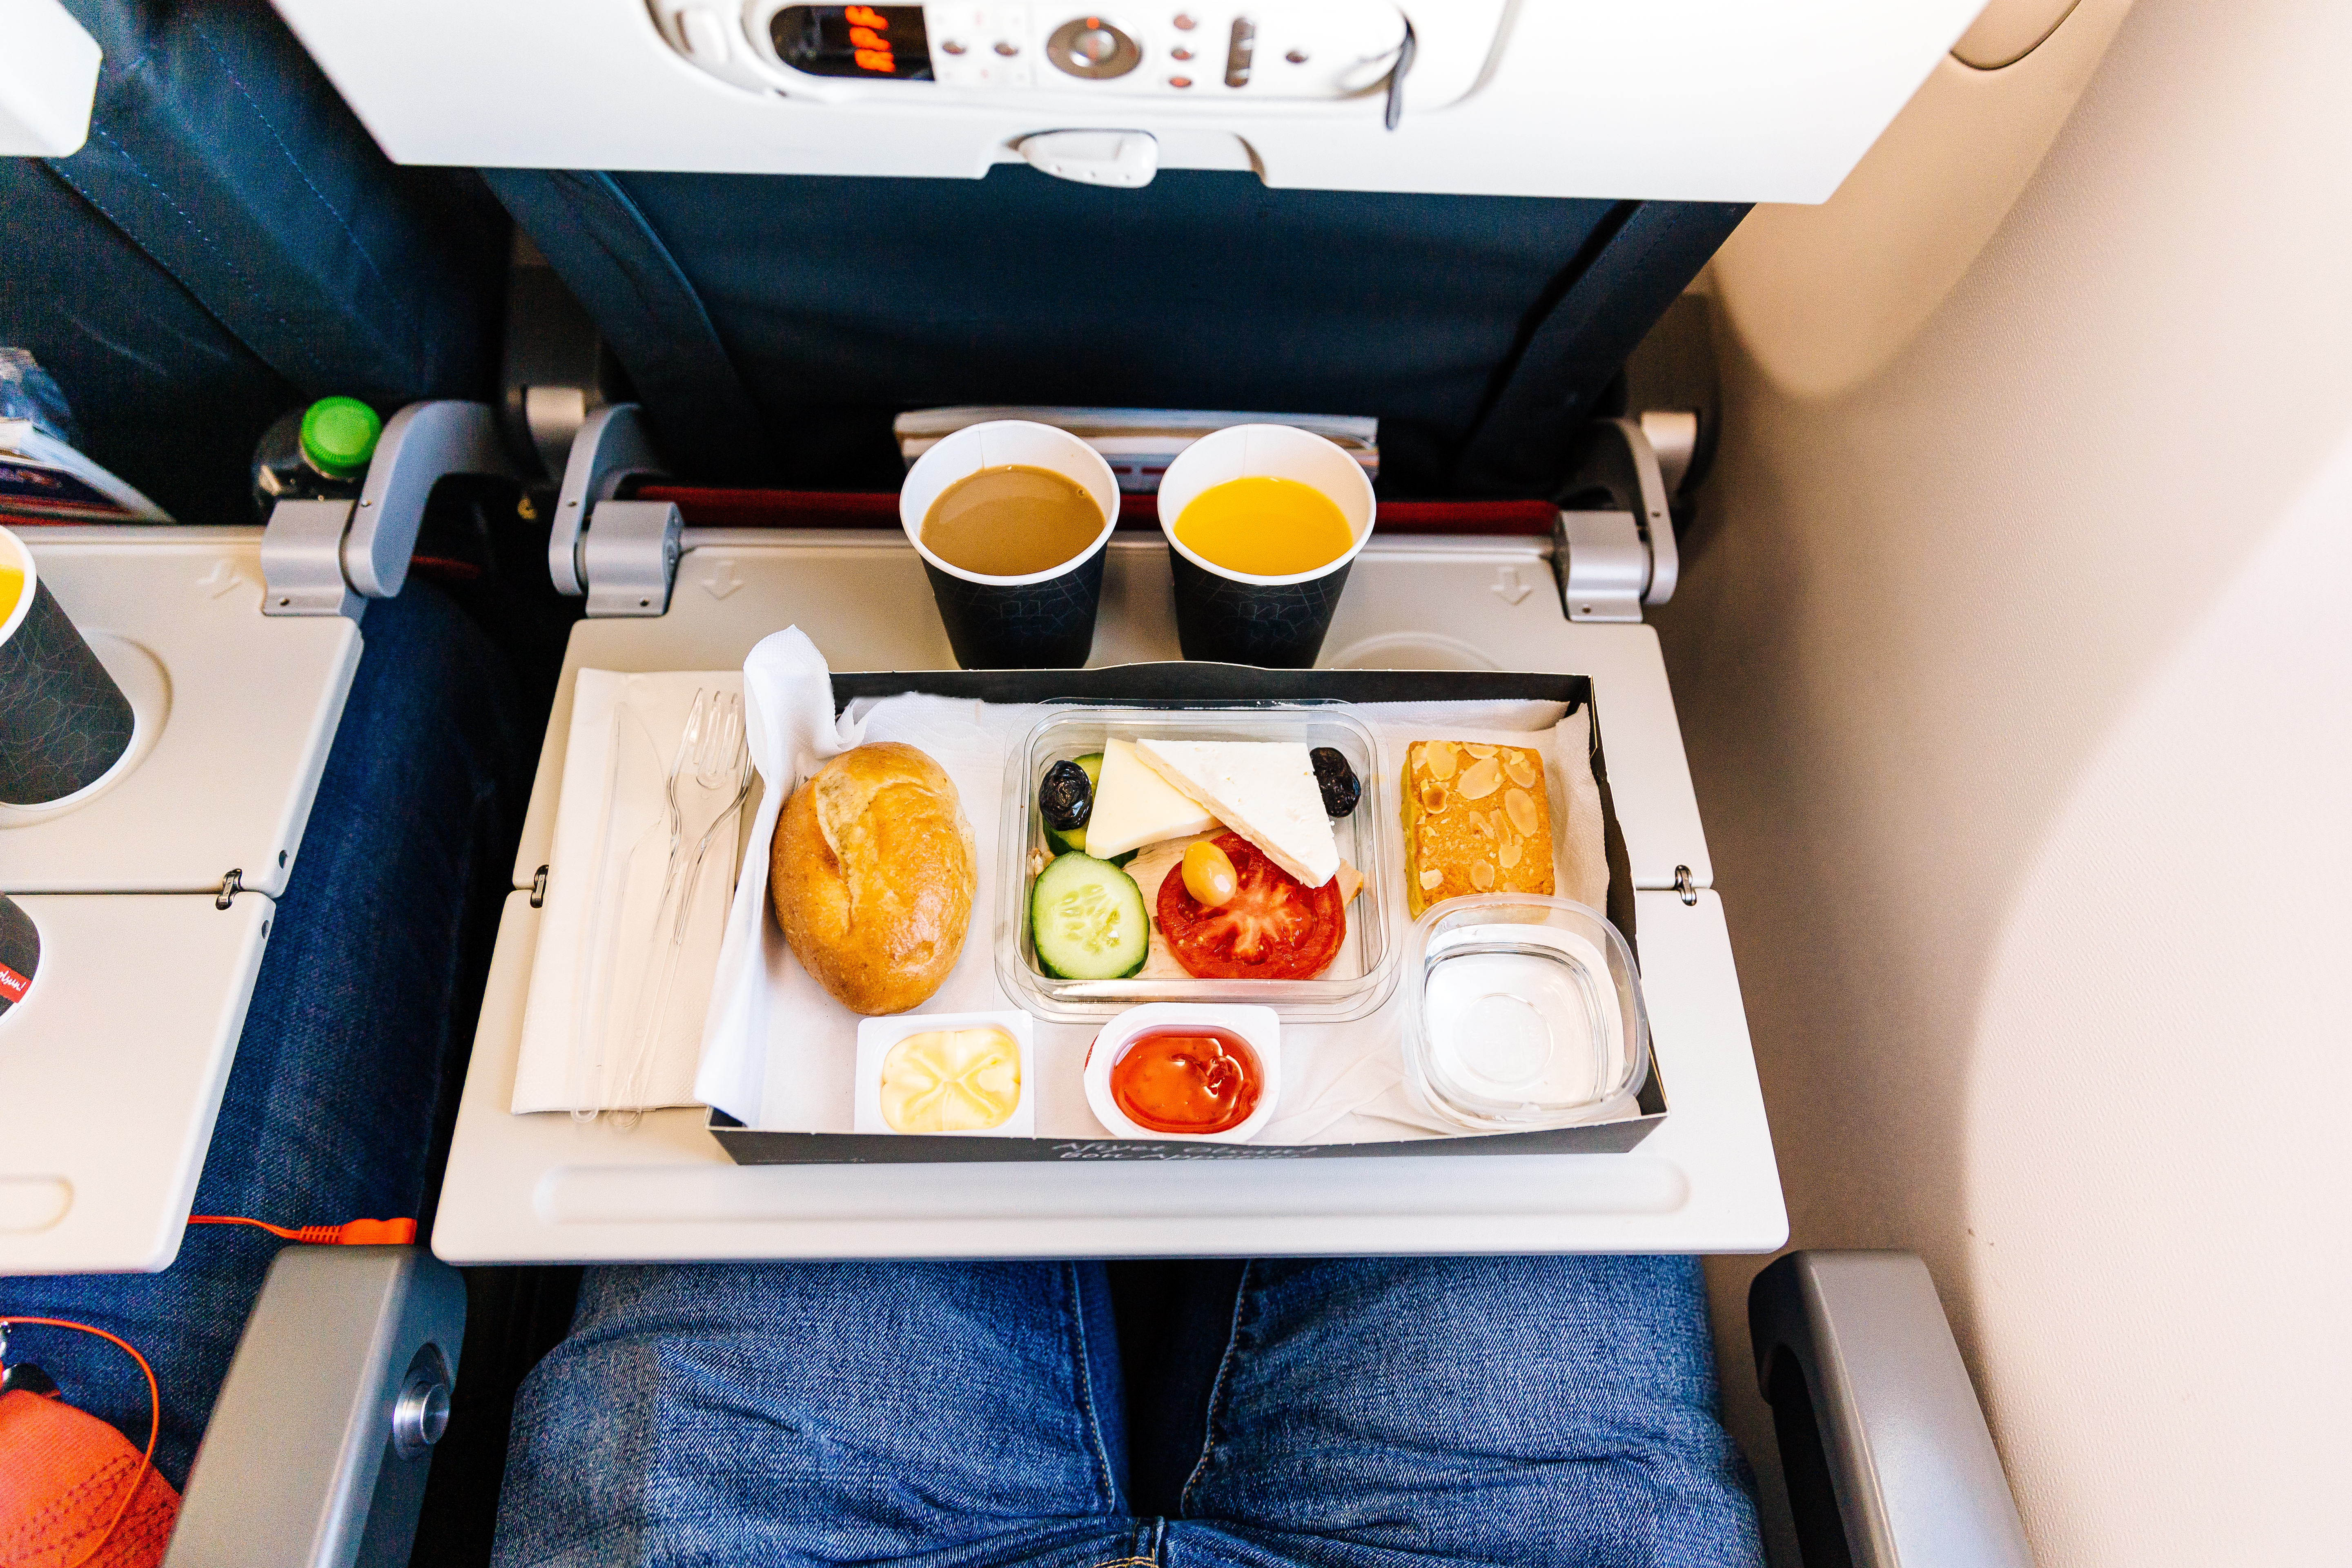 Airplane food served to an economy class passenger | Source: Getty Images